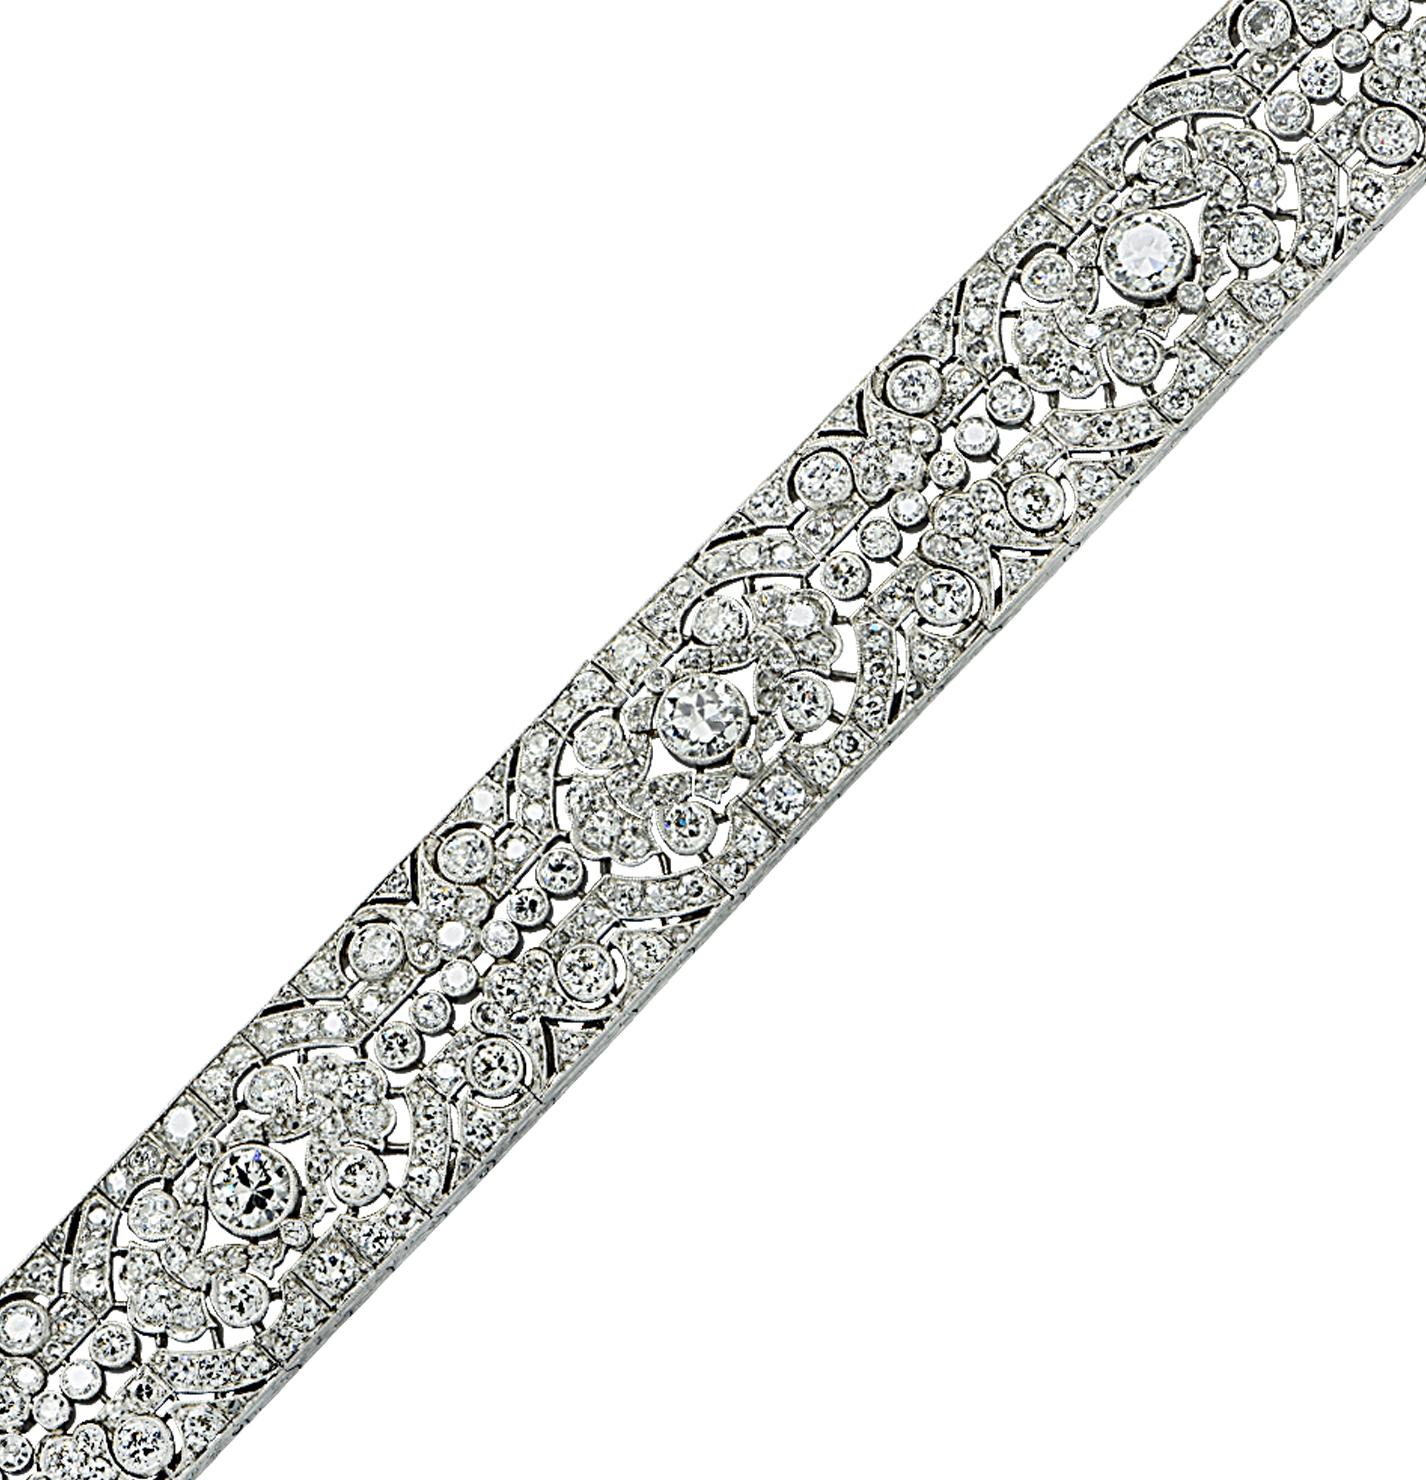 This Art Deco 20 carat diamond bracelet Circa 1920s is a stunning piece of jewelry that showcases the best of the Art Deco era. The bracelet is made from the highest quality 20 carat diamonds, featuring old European cut diamonds, single cut